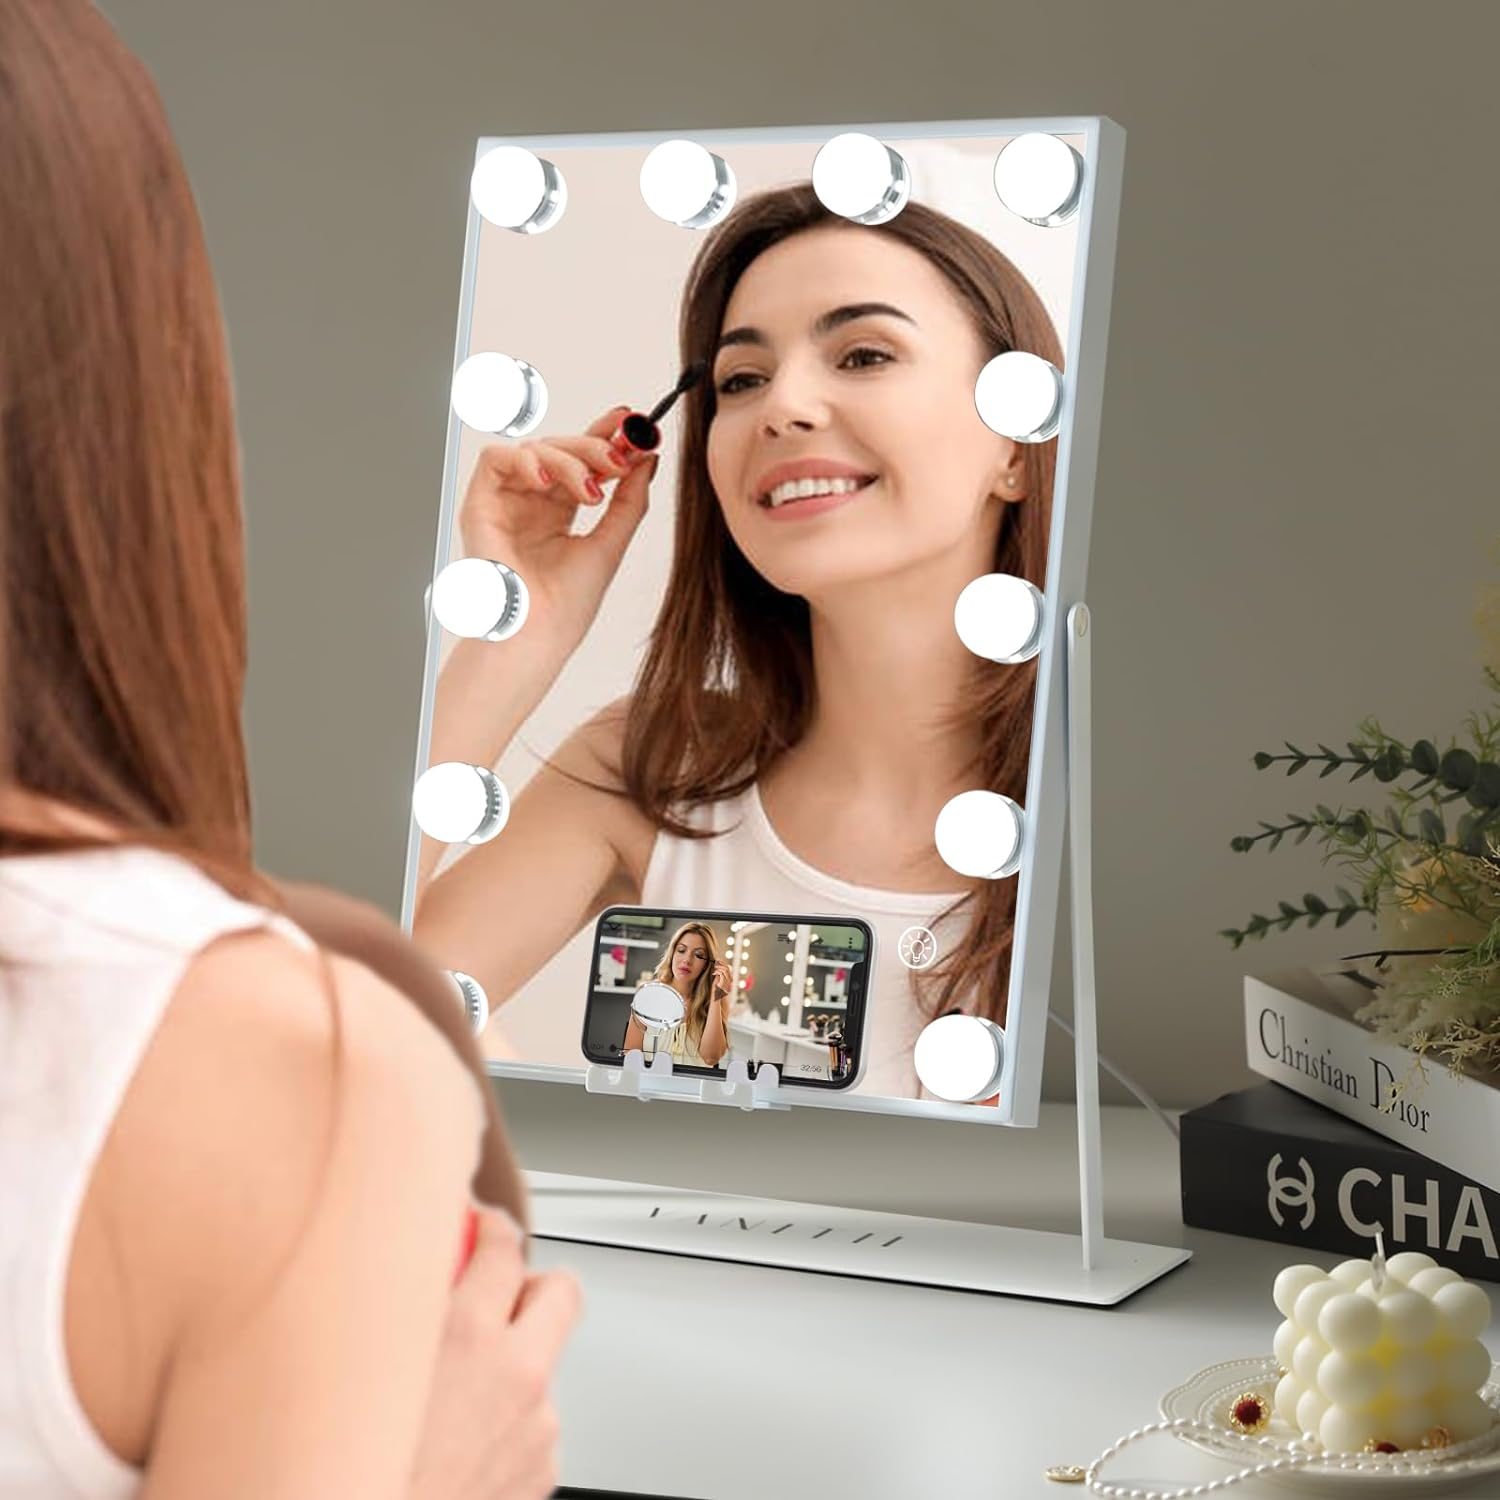 Illuminate your beauty routine with the Hollywood Glow Makeup Mirror from VANITII. This glamorous makeup mirror features wireless charging, 9 dimmable LED bulbs, and a light-up display.